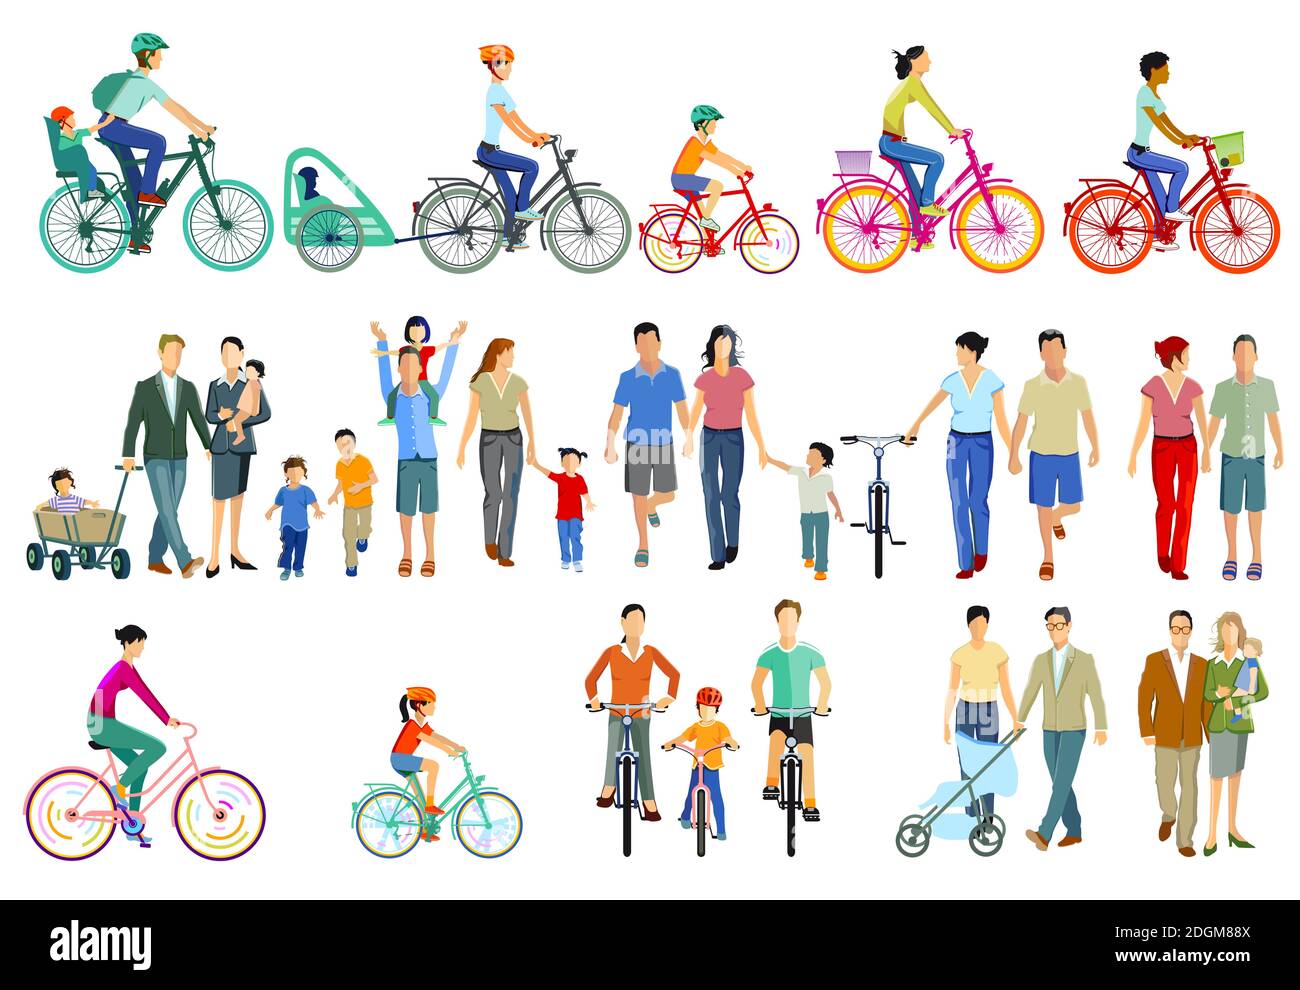 Families, cyclists and pedestrians illustration Stock Vector